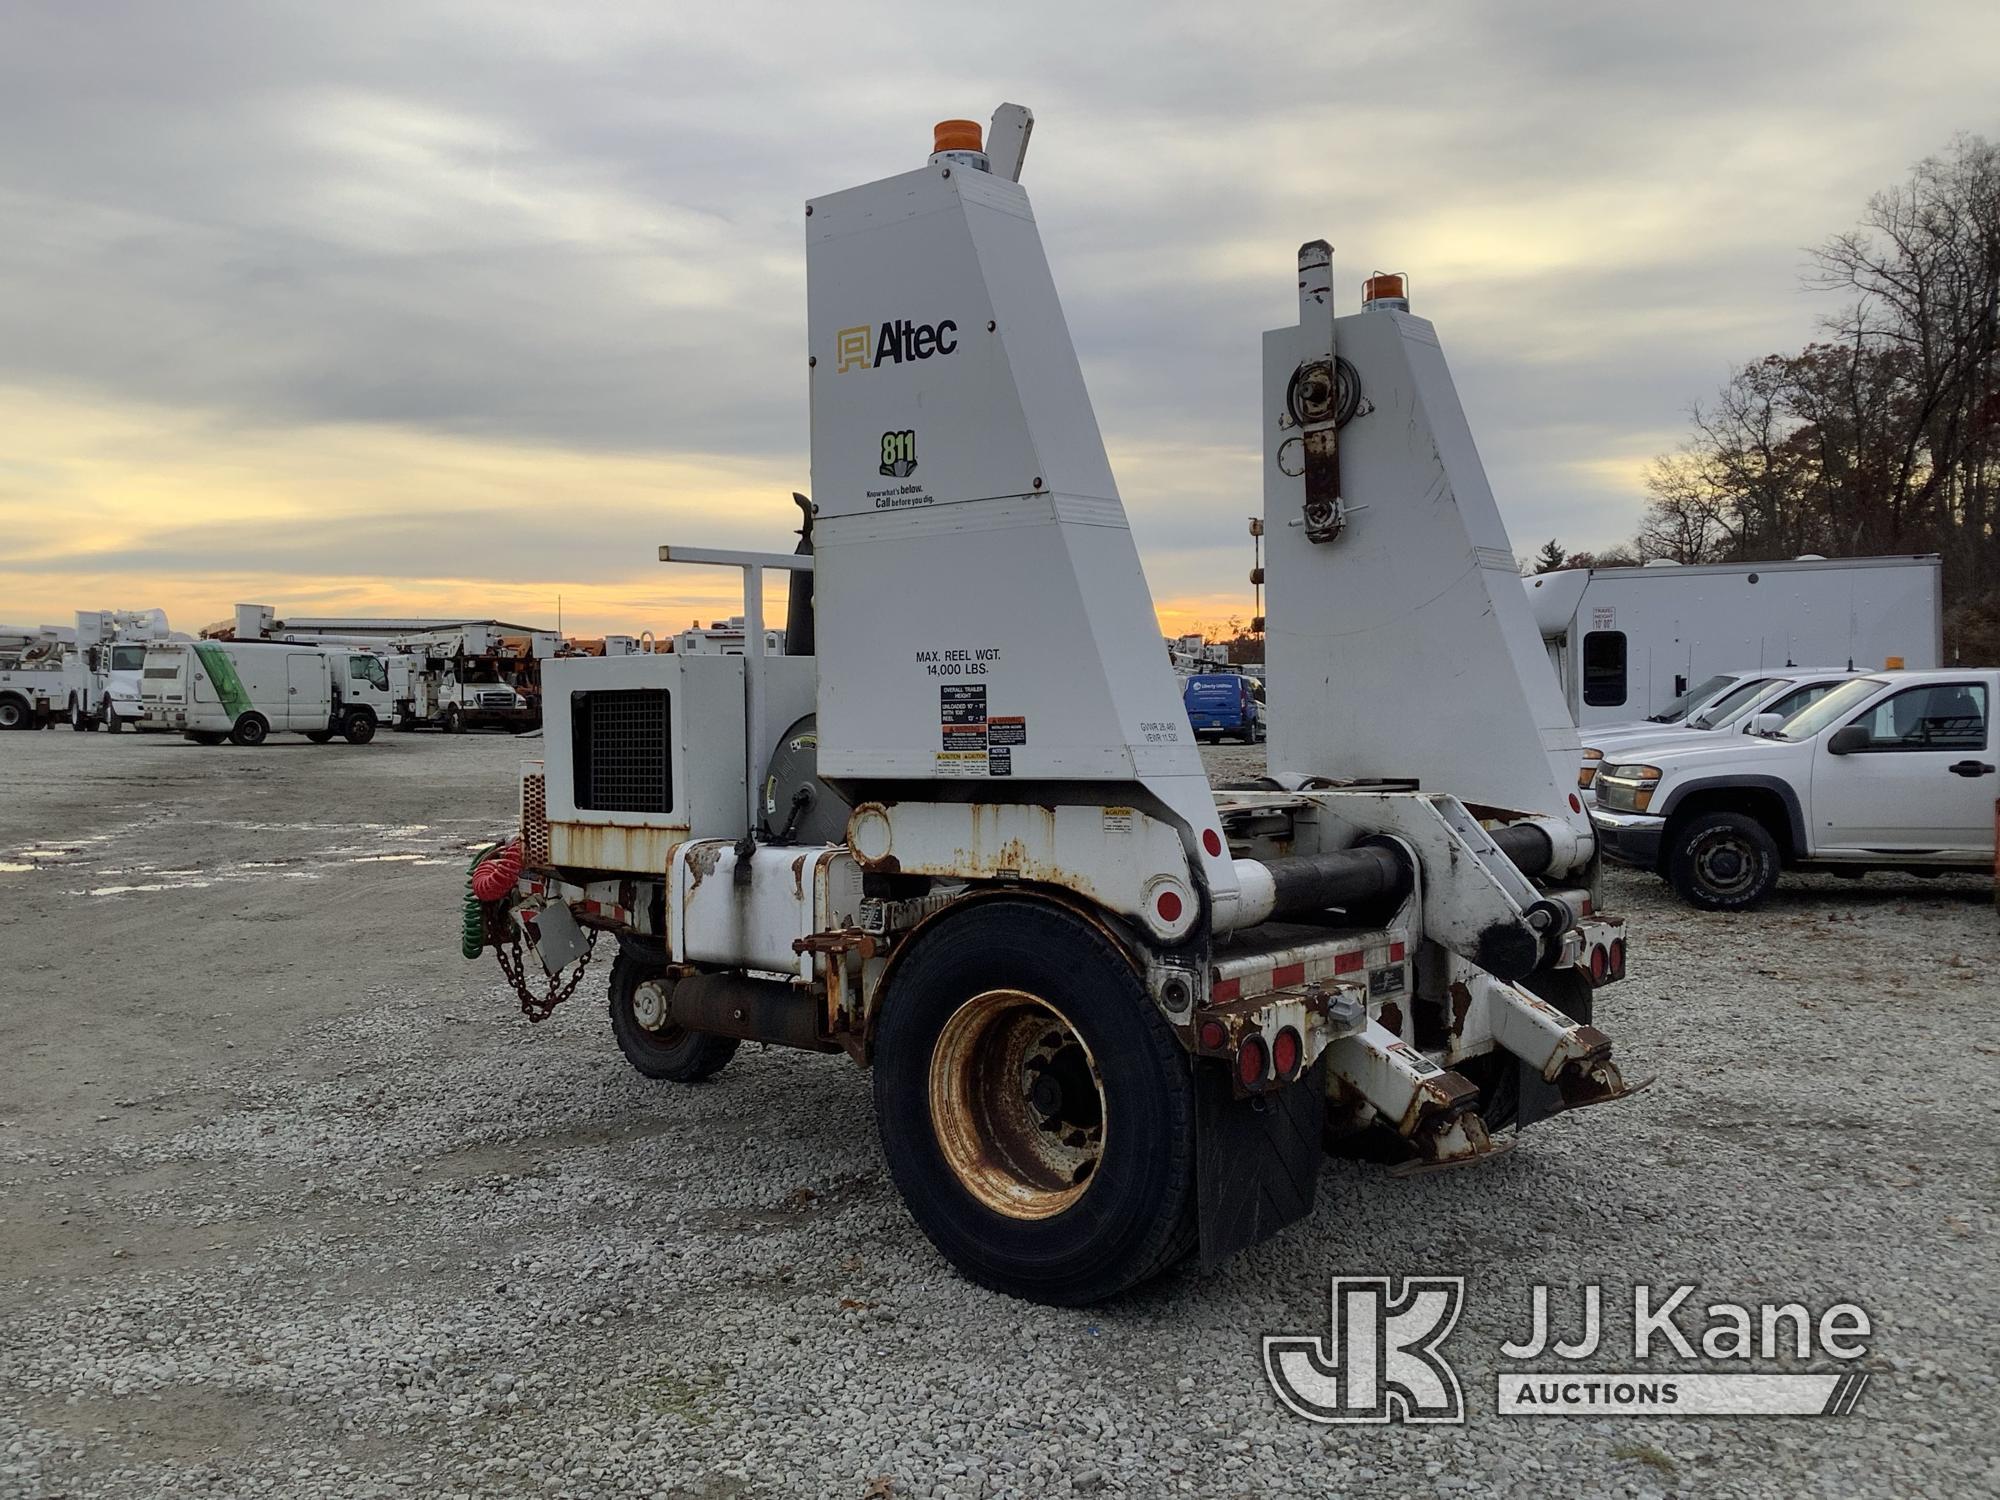 (Shrewsbury, MA) 2012 Altec AD108 Self-Propelled Underground Cable Puller Runs, Moves & Operates) (R